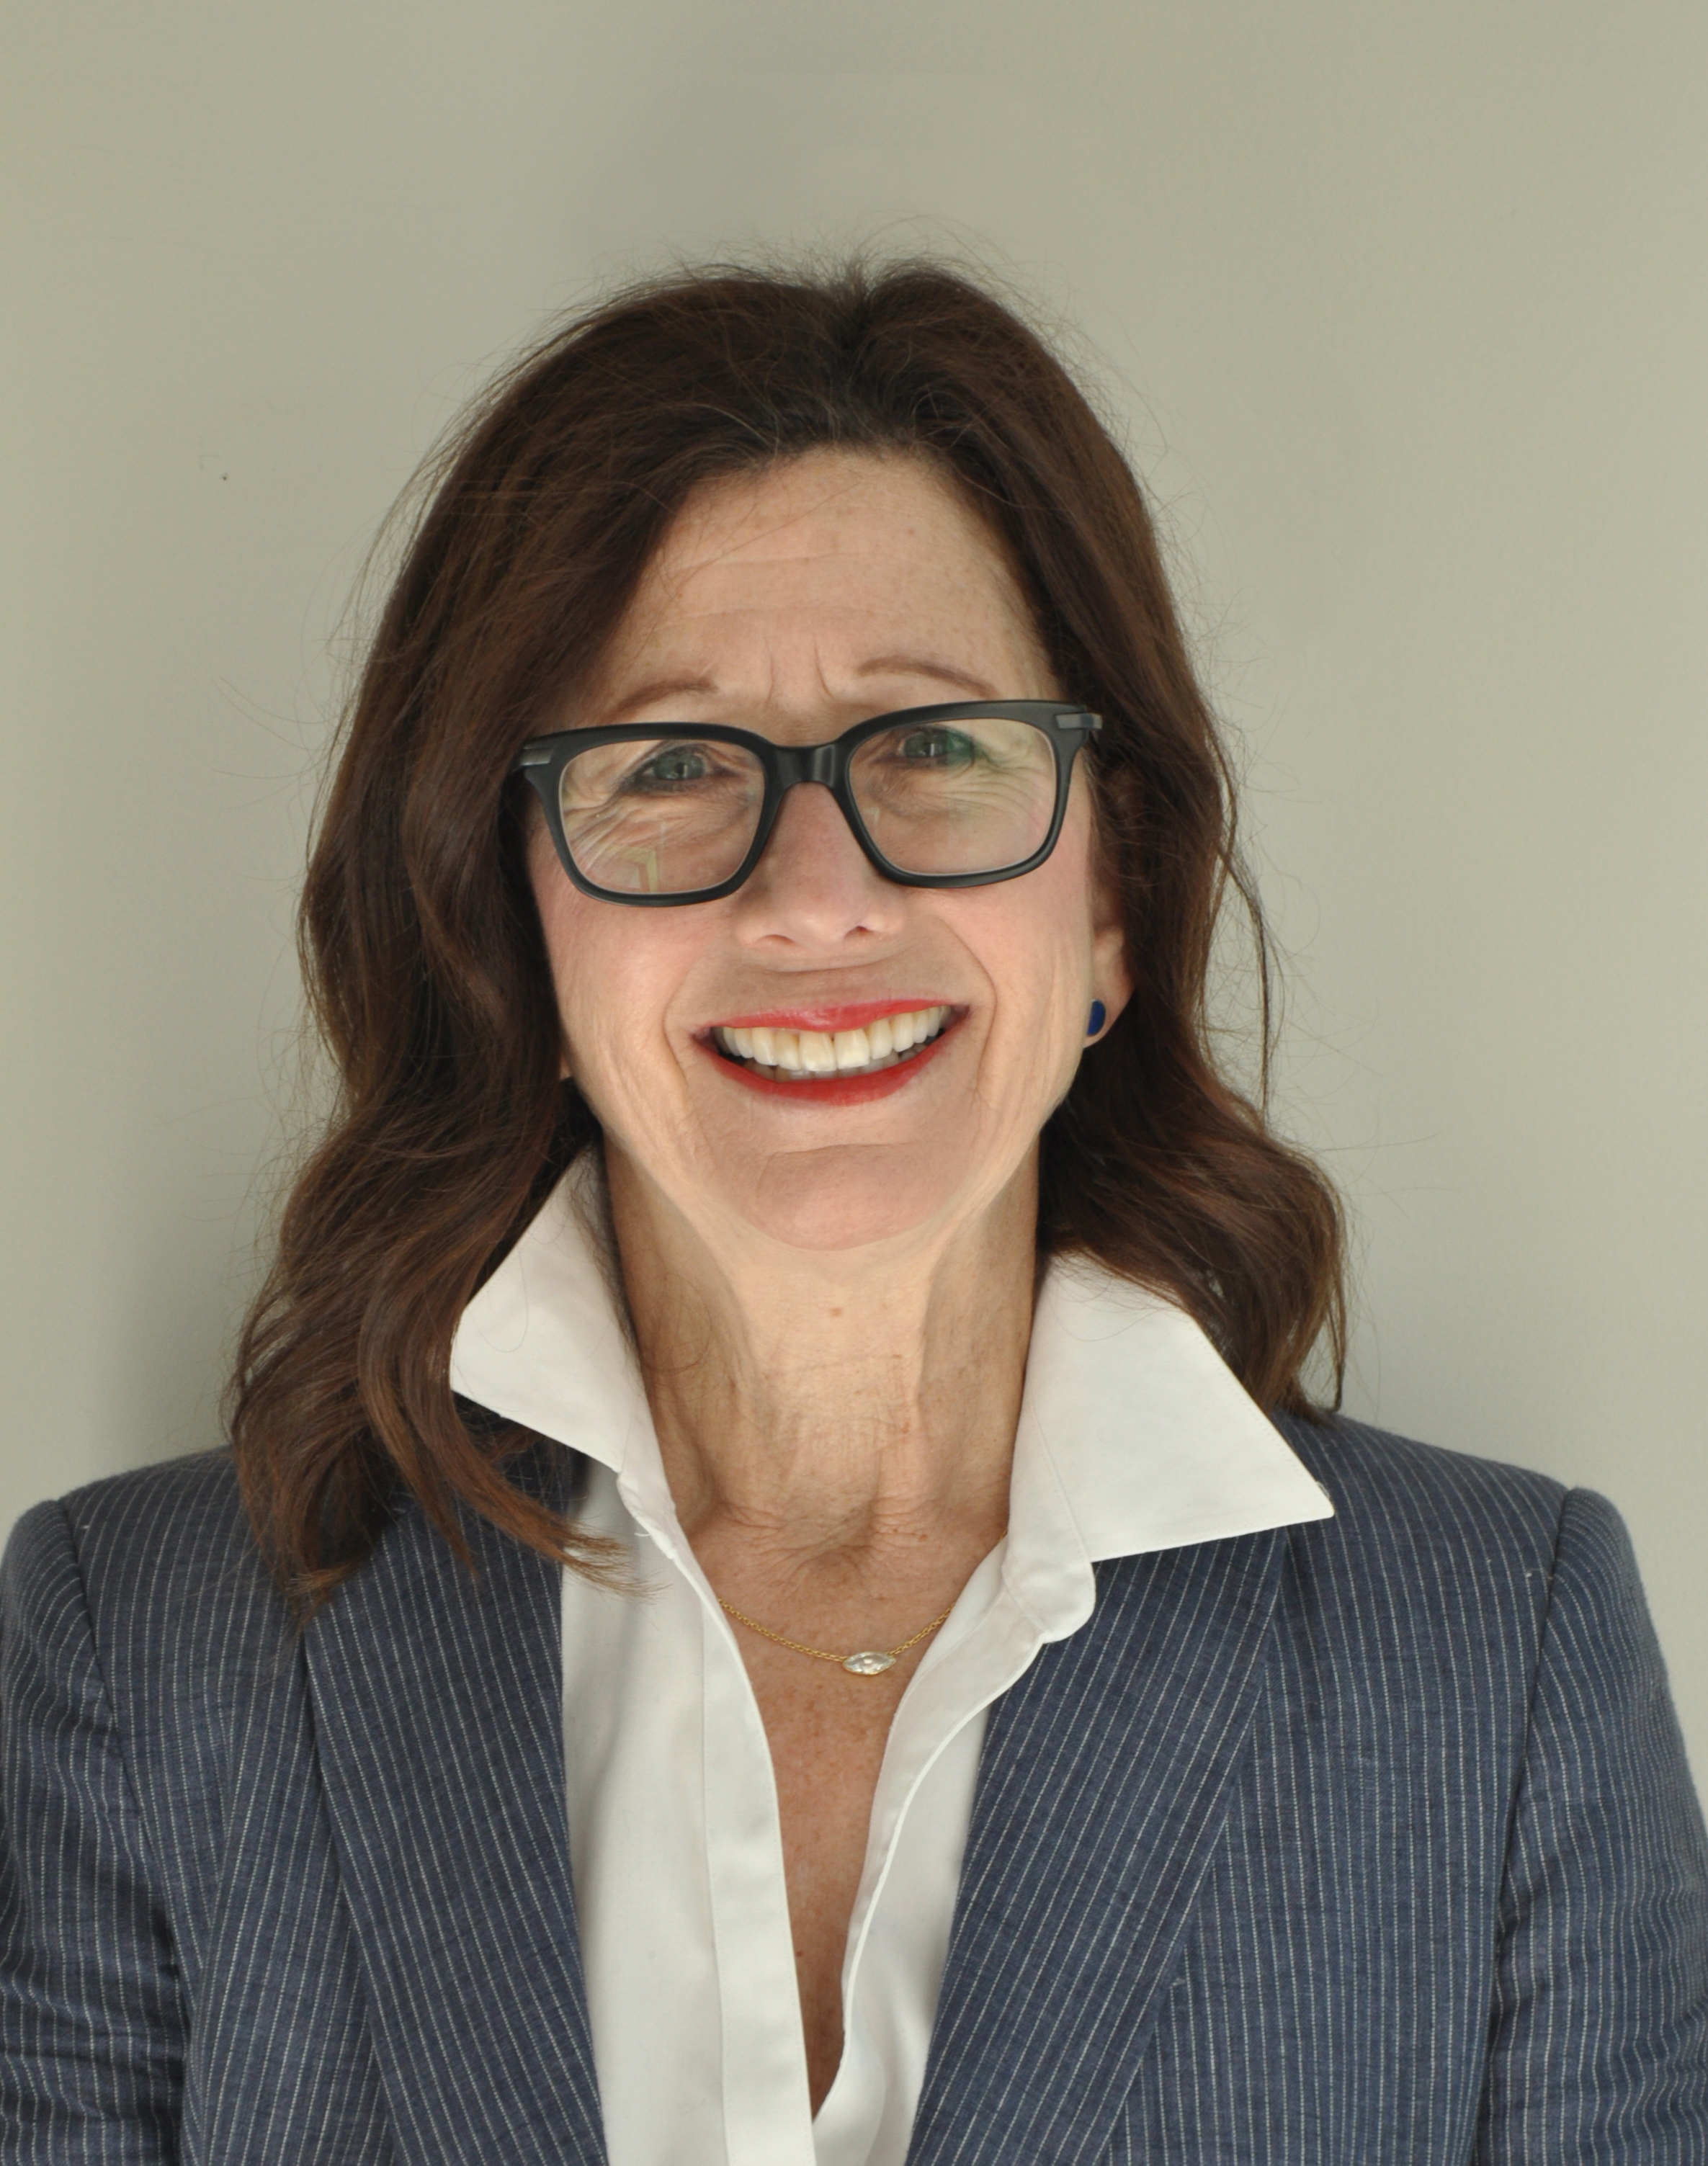 The CRRF welcomes Nancy Rosenfeld as a member of the Foundation's Board of Directors